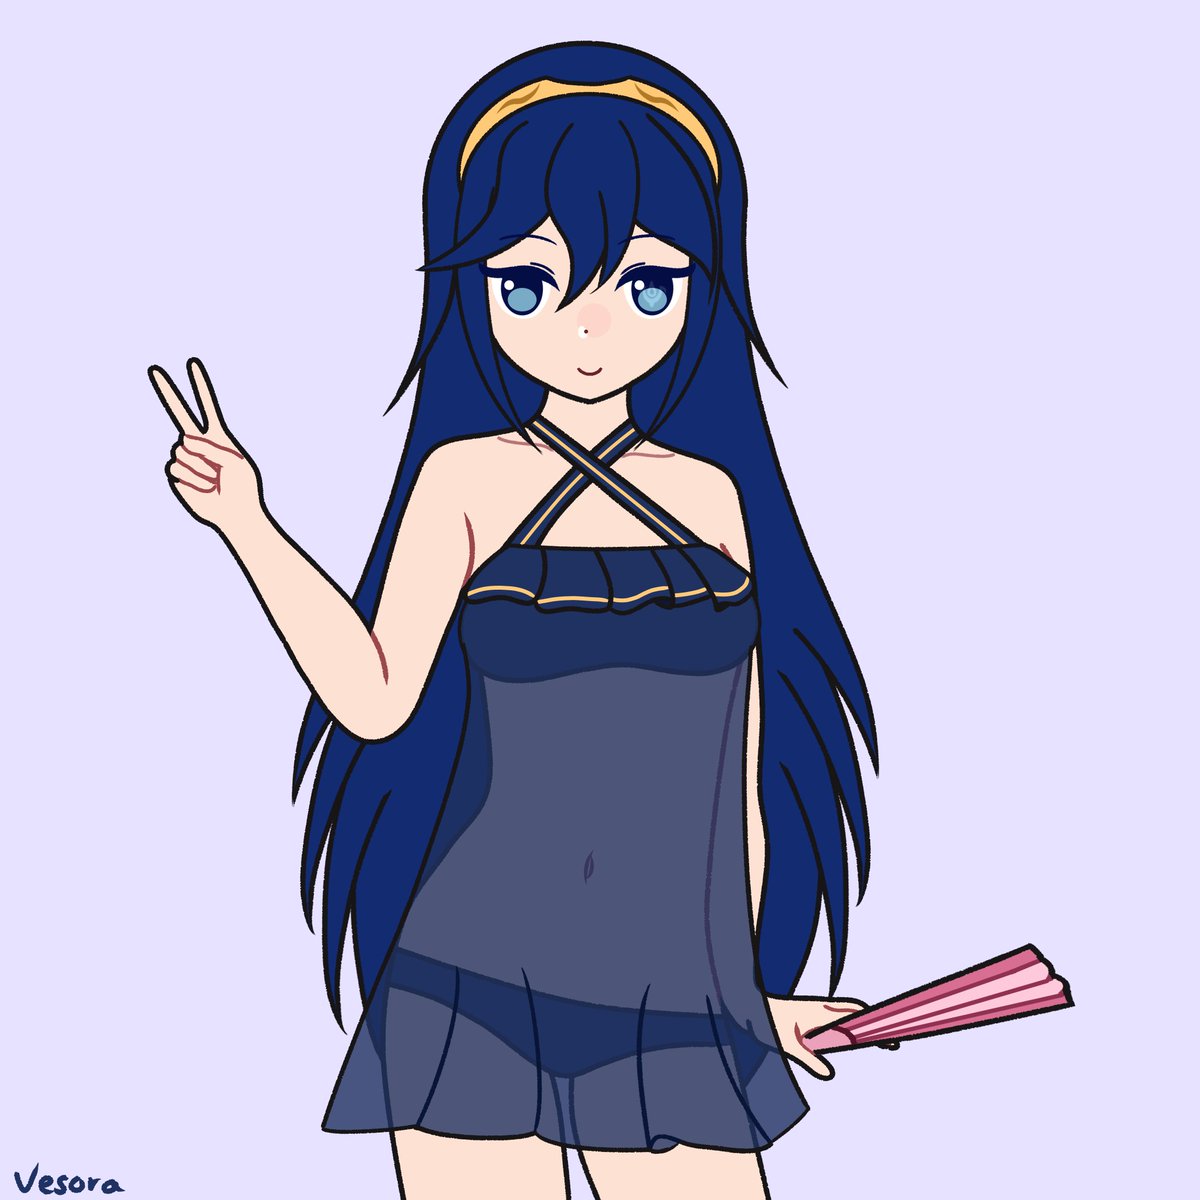 Swimsuit Lucina commission! 